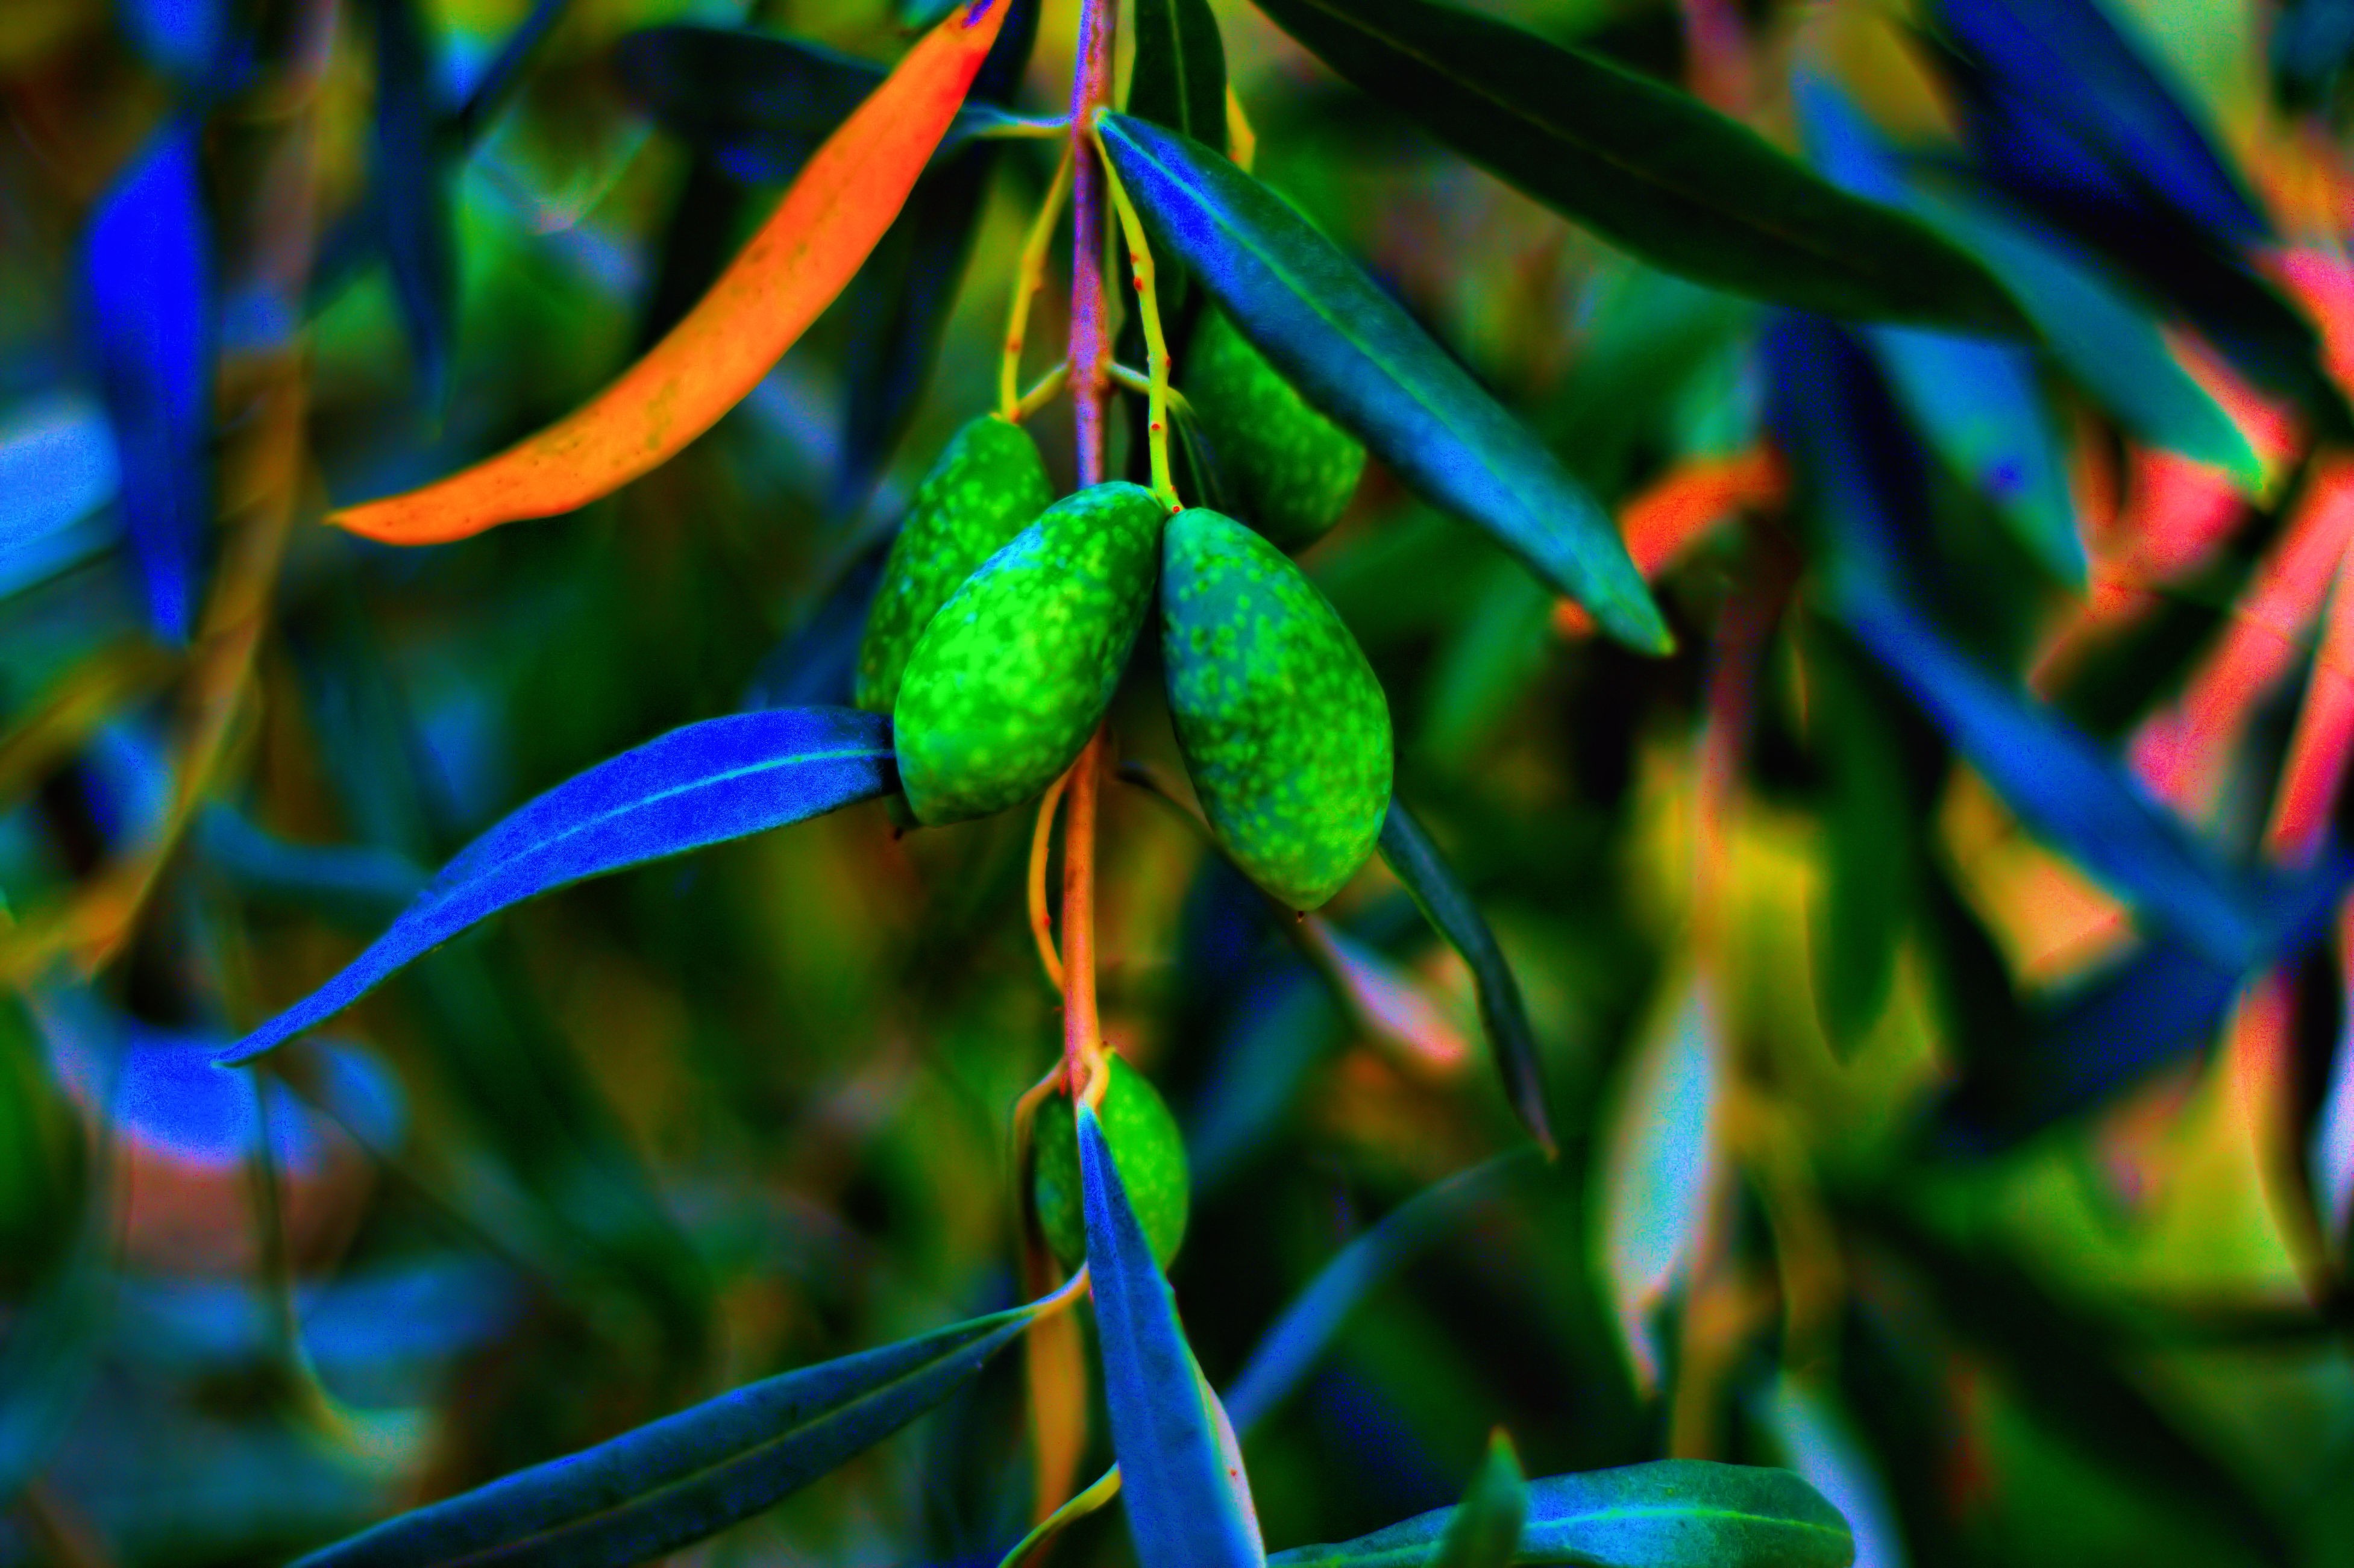 Olives Trees Plants Outdoors Leaves 3906x2602